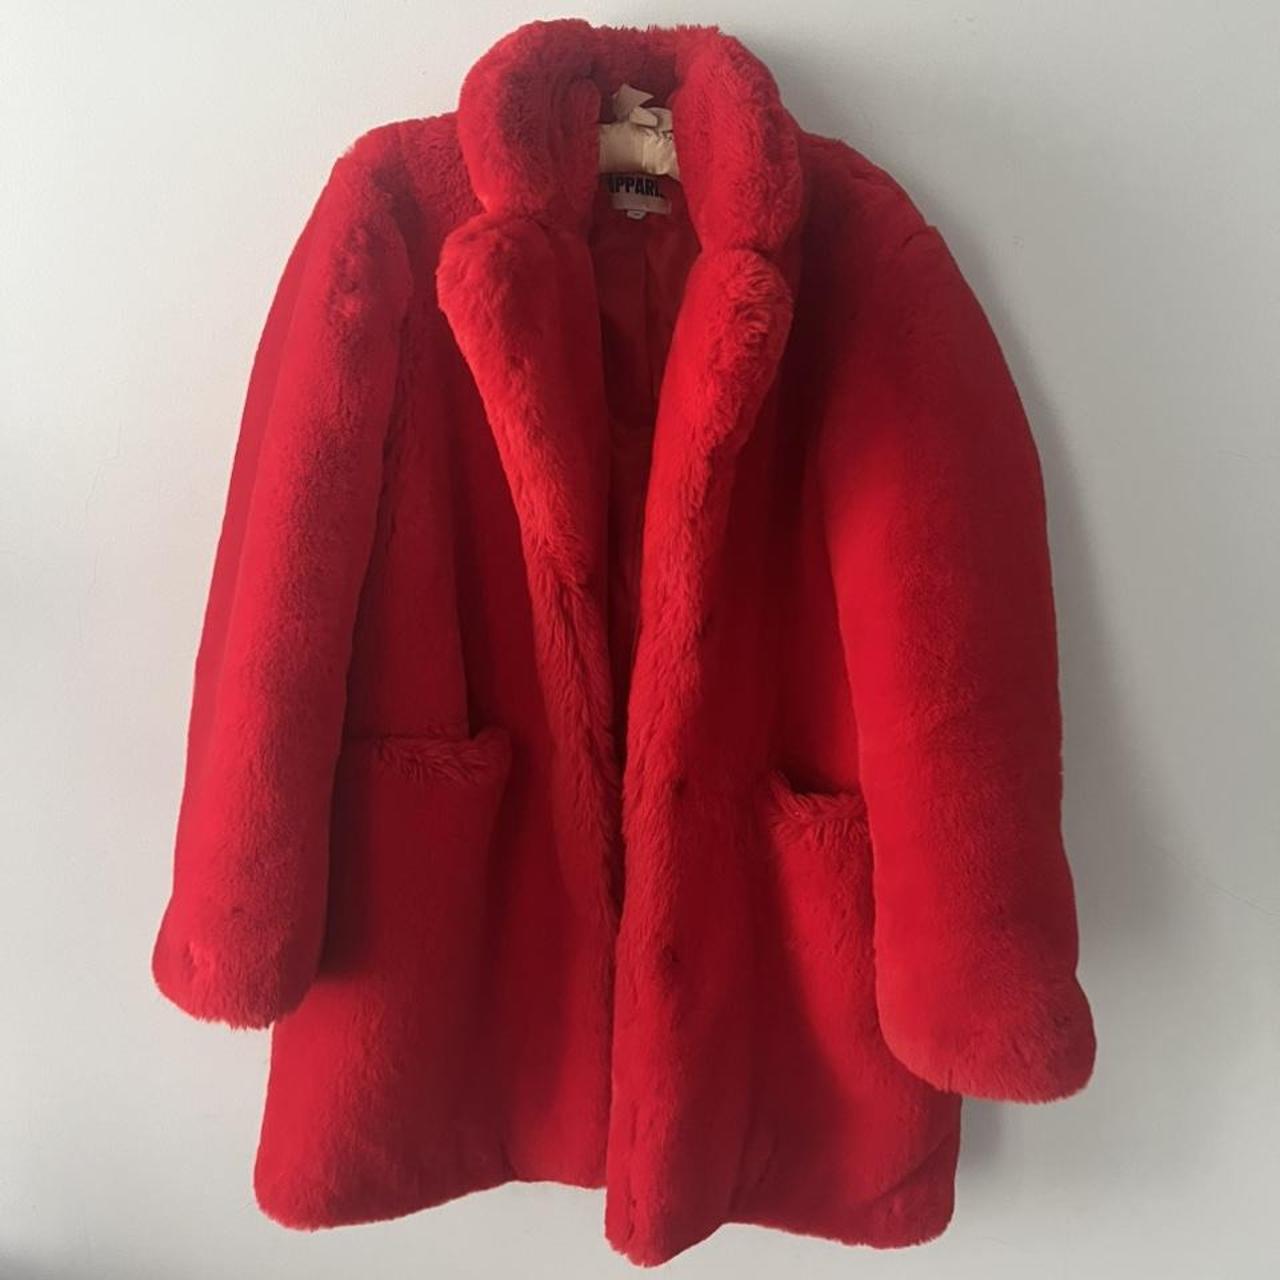 Apparis red faux fur coat Bold statement perfect for... - Depop